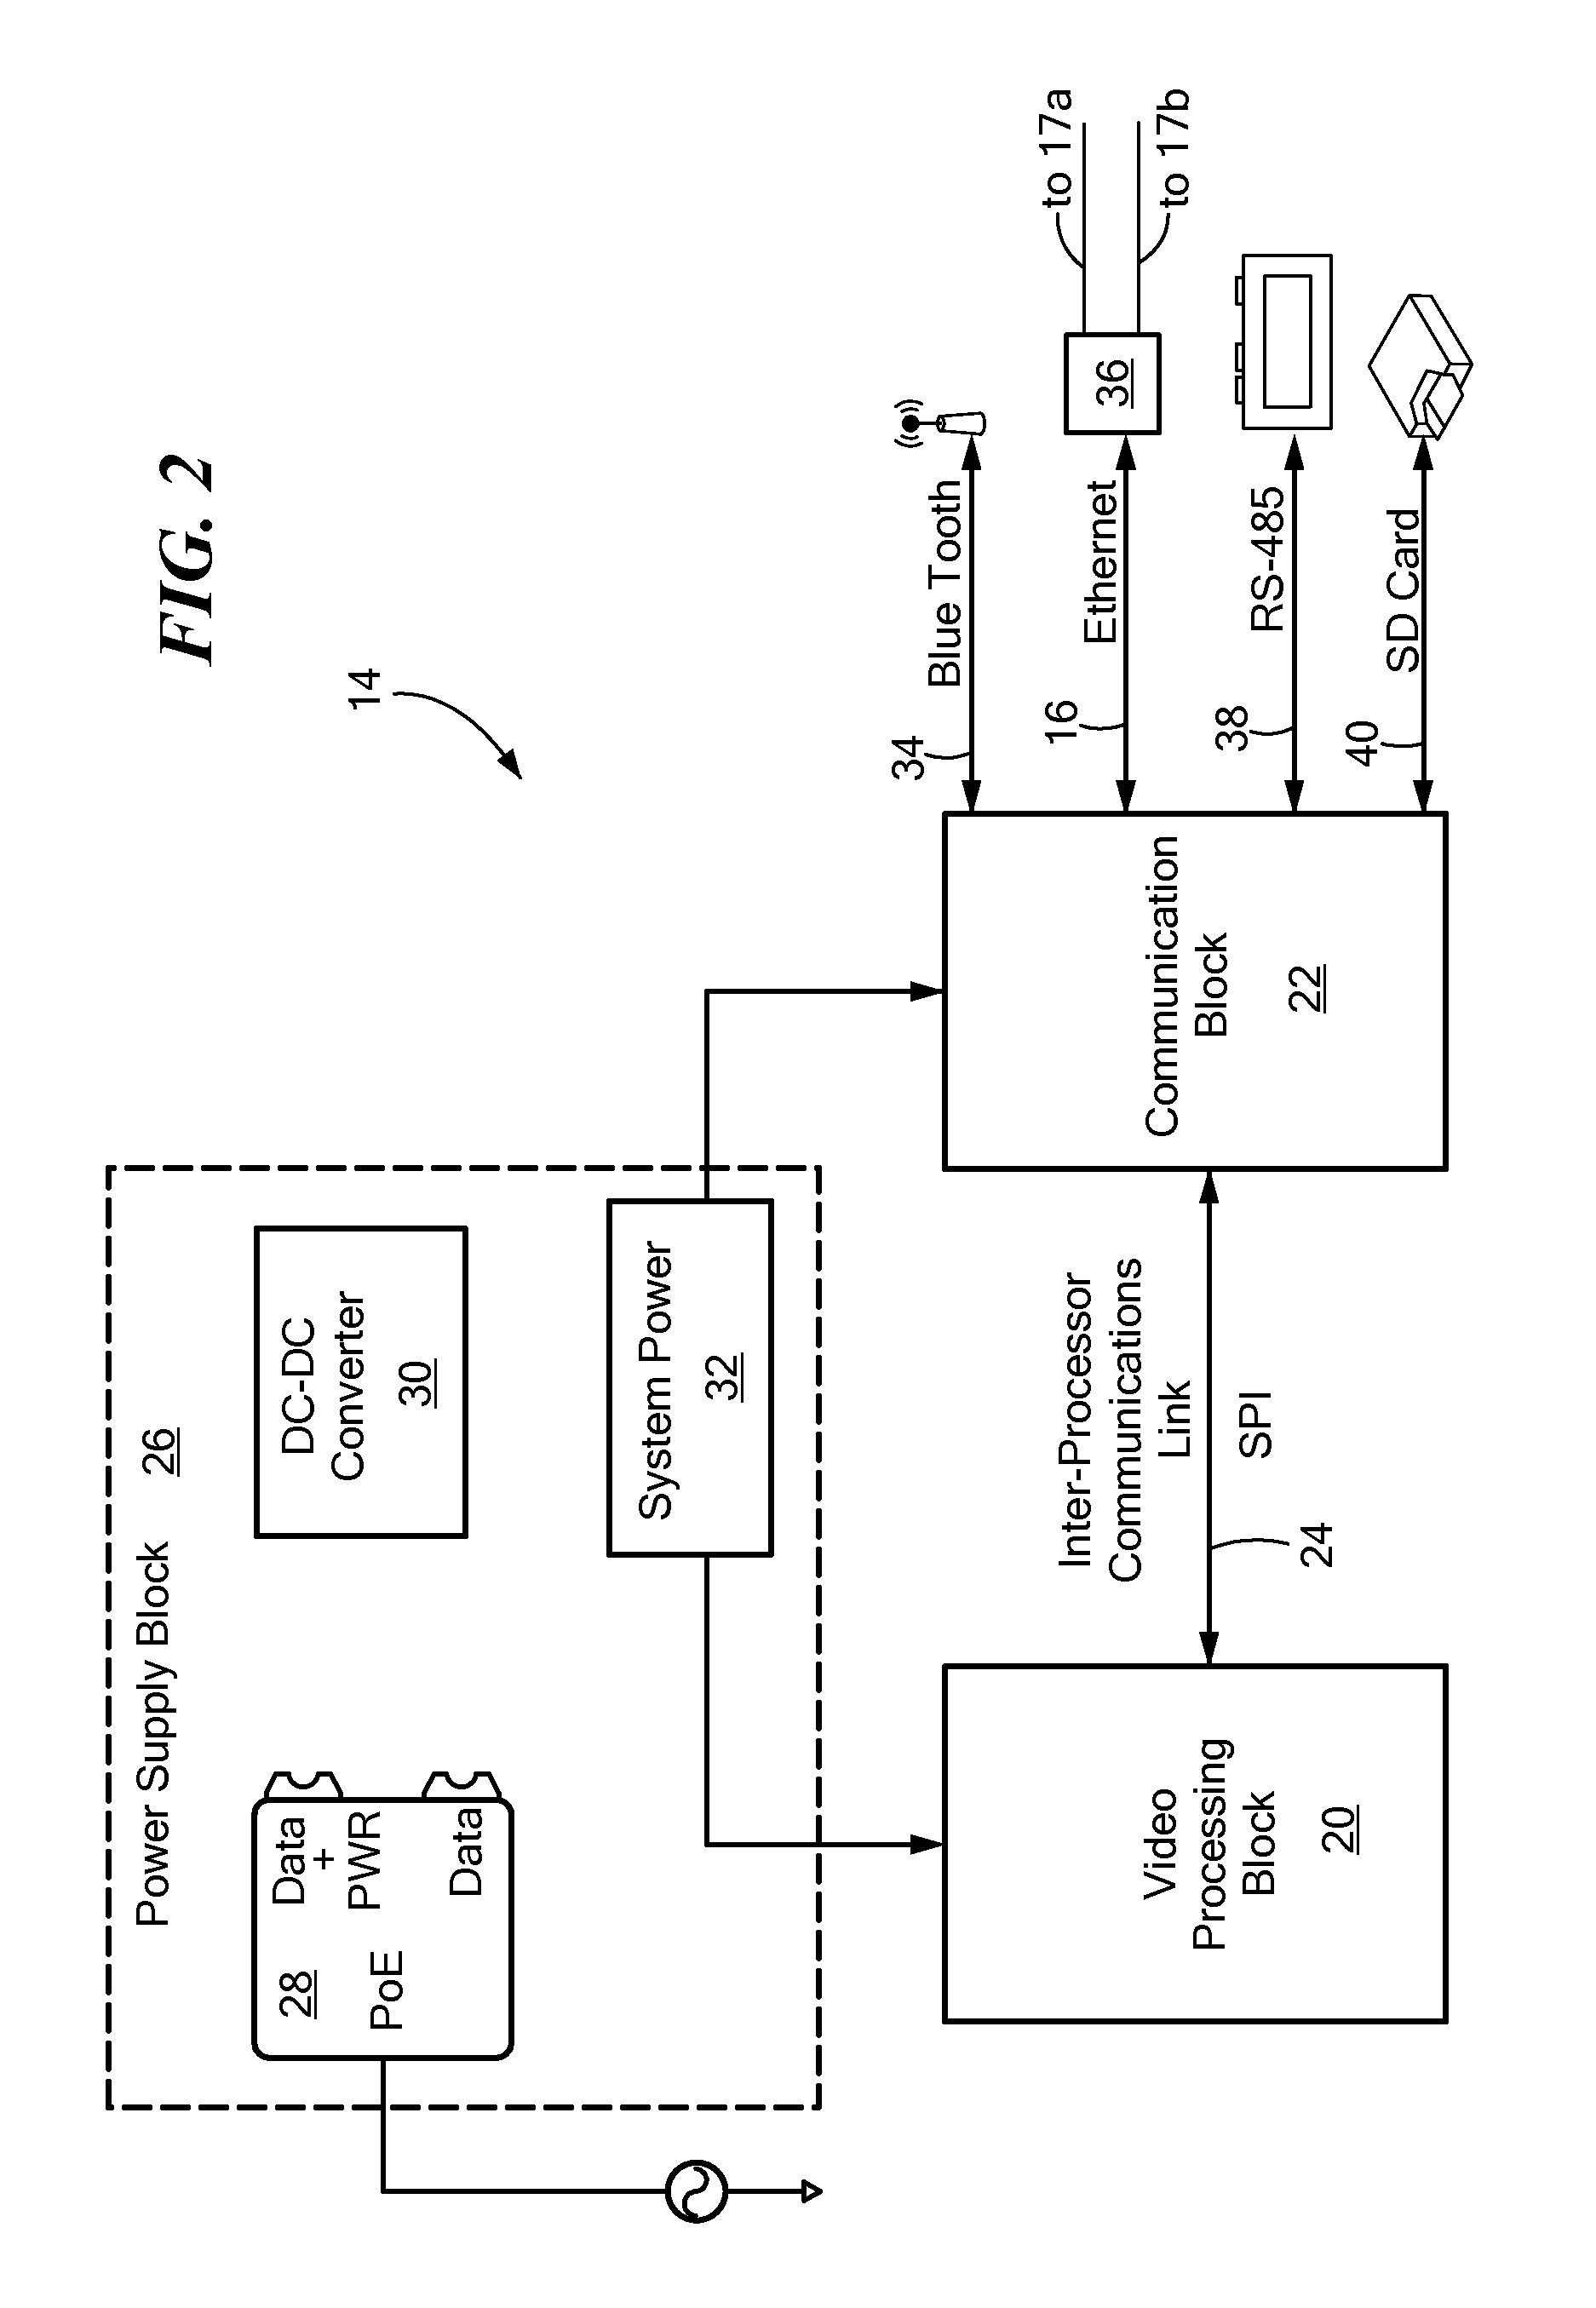 System and method for automatic configuration of master/slave devices on a network